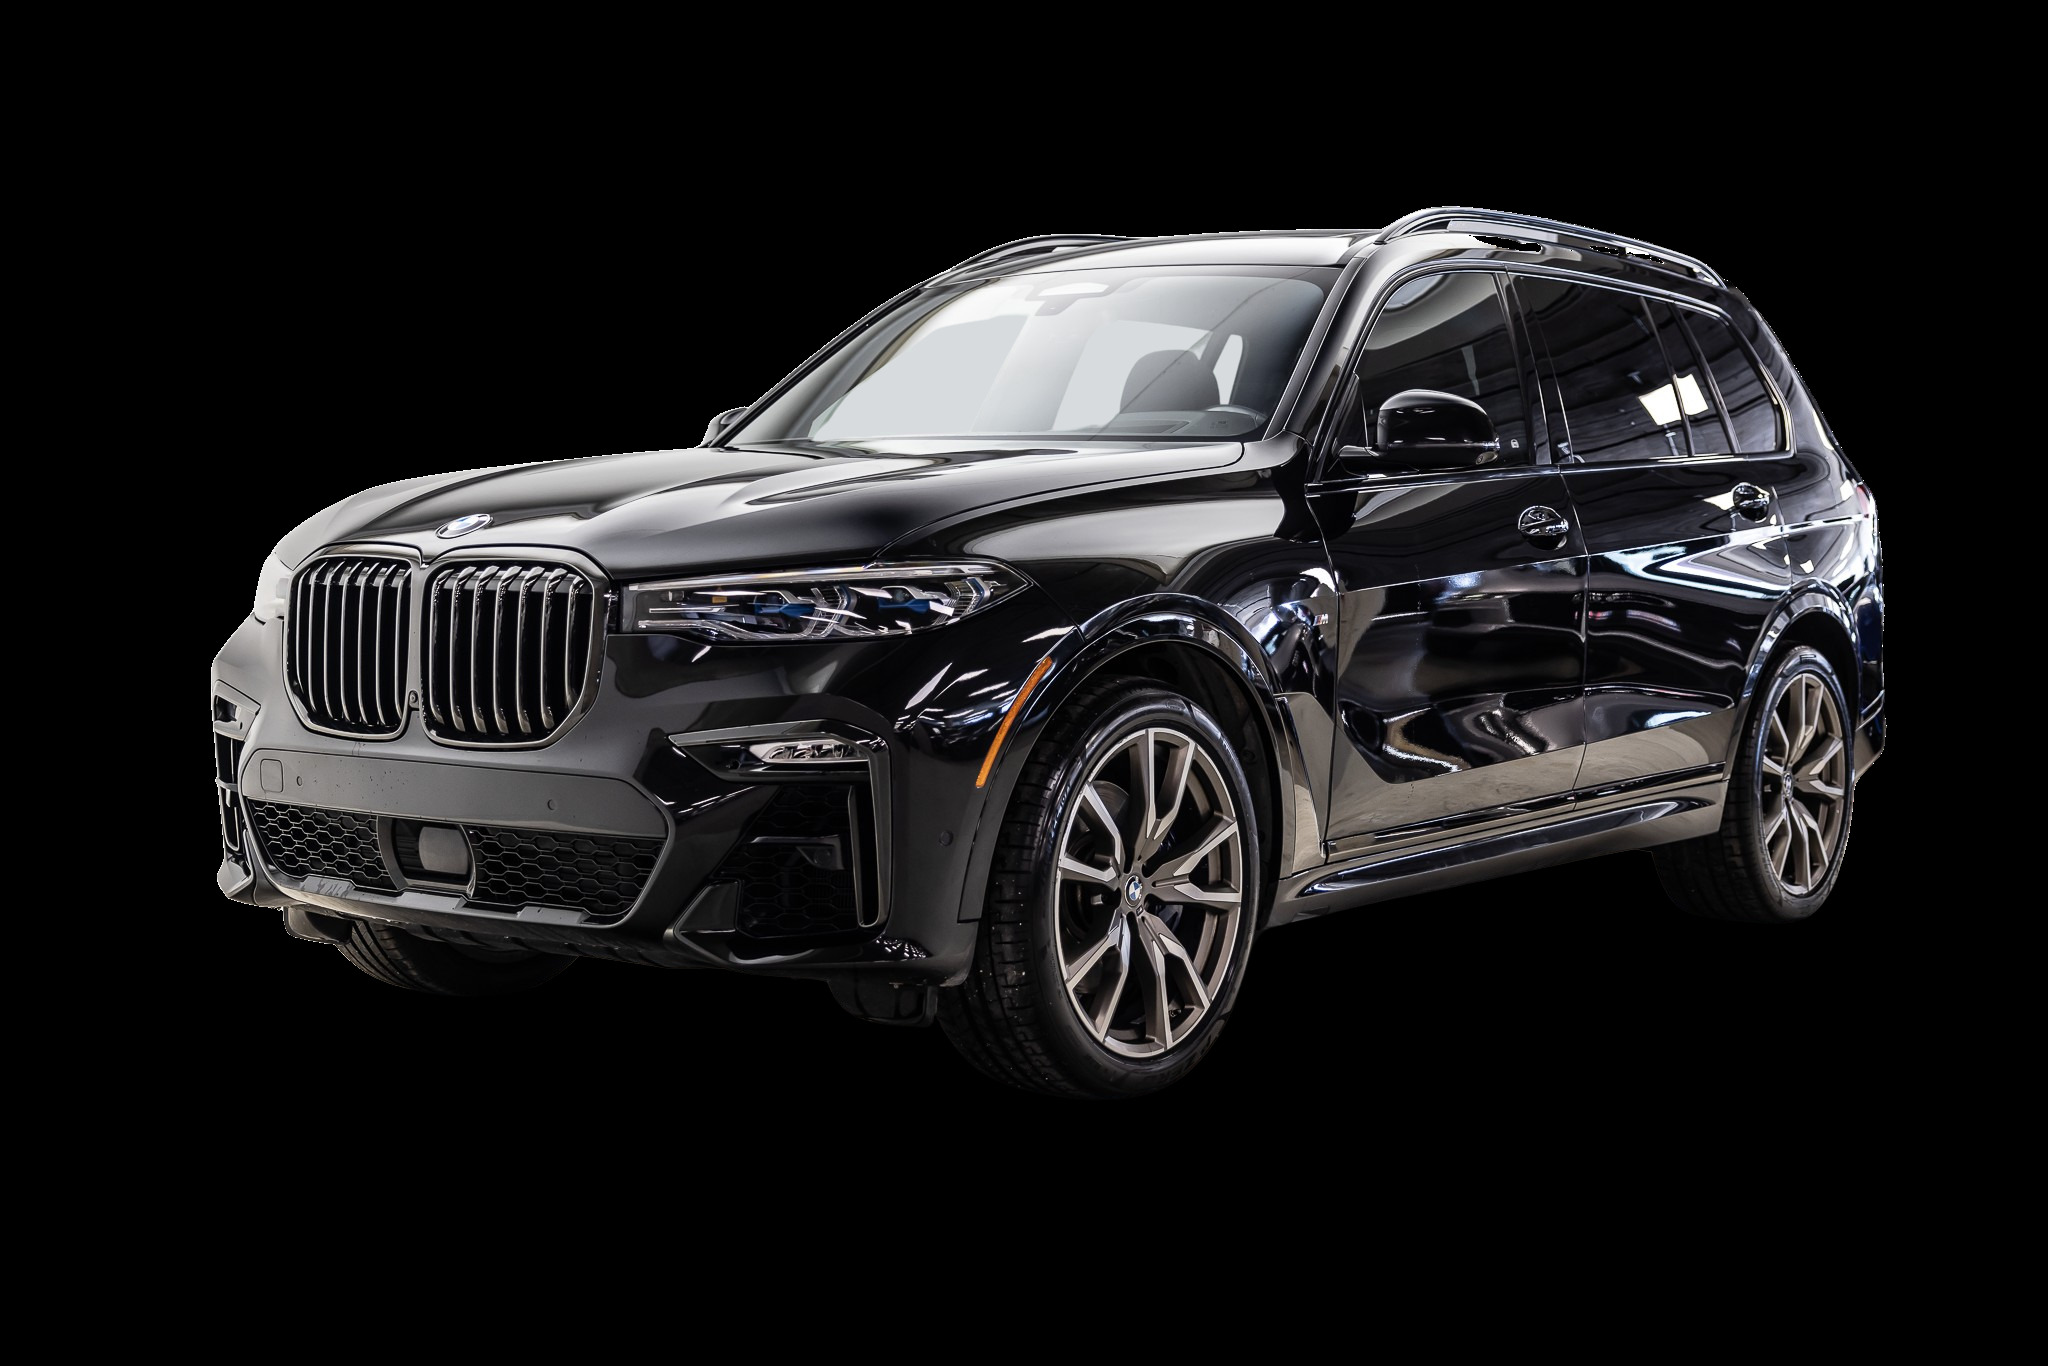 2021 BMW X7 M50i Sports Activity Vehicle, Pano Roof, M Pack.